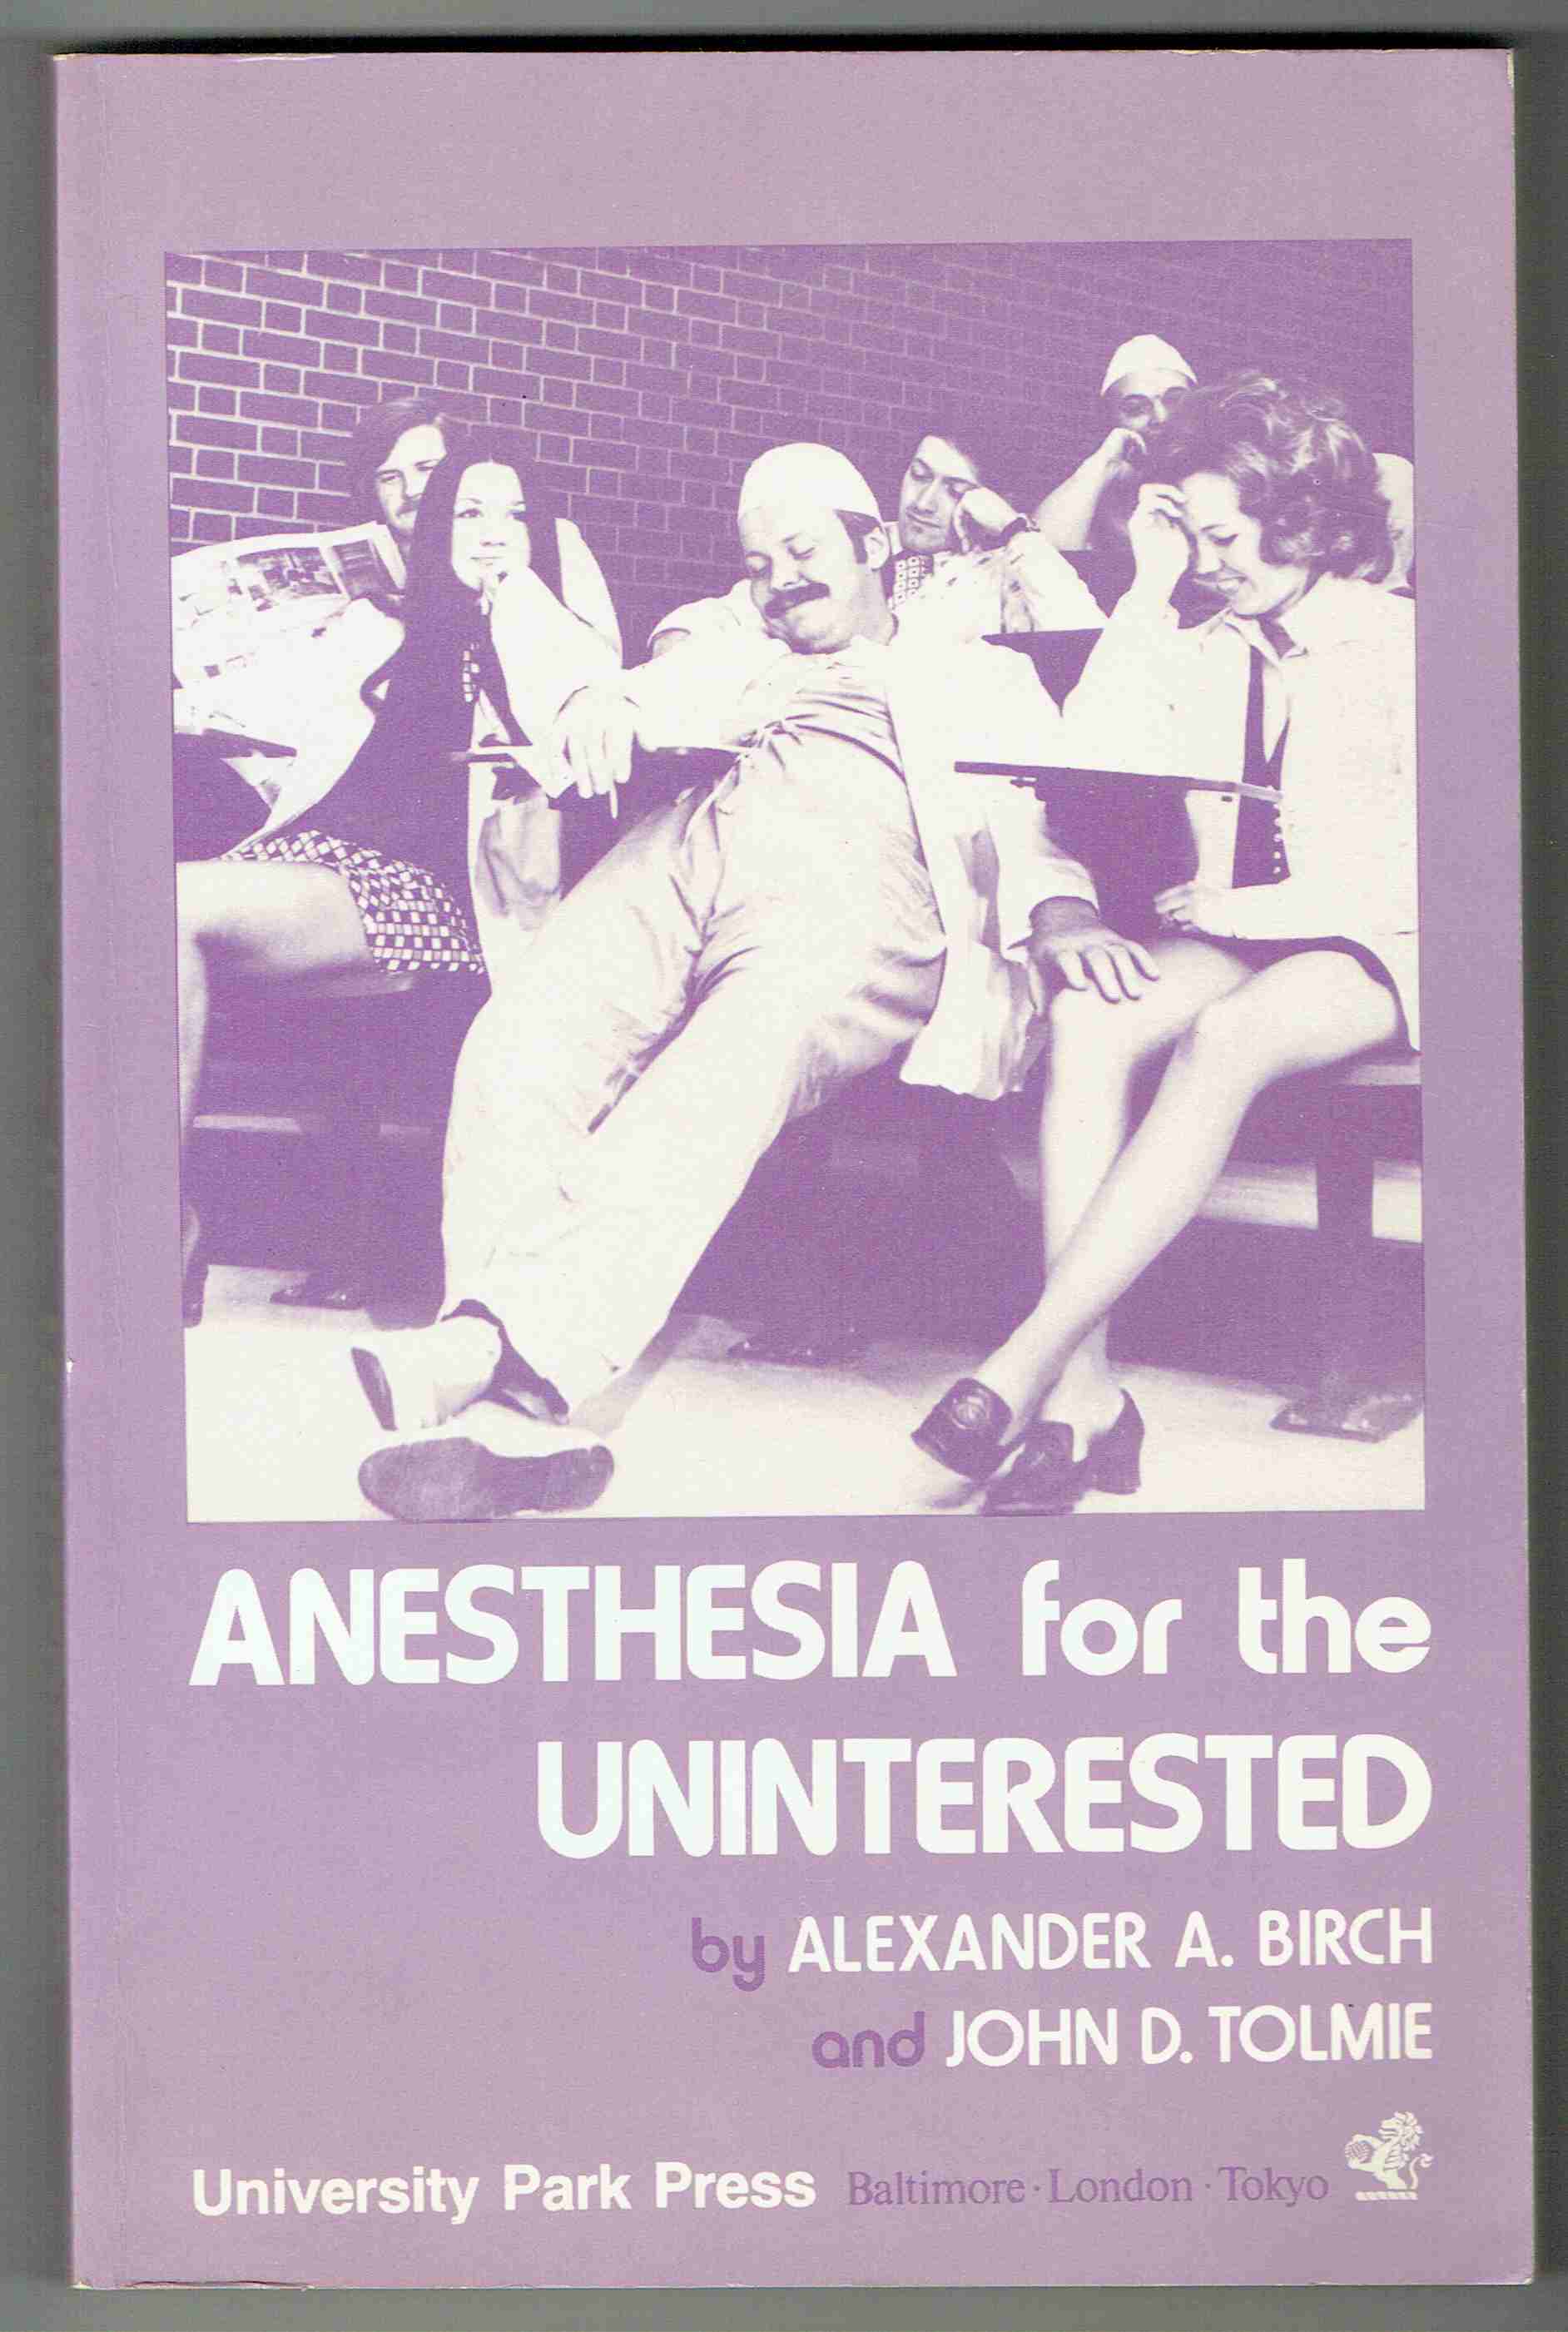 Anesthesia for the uninterested | whitehorsemarquees.co.uk